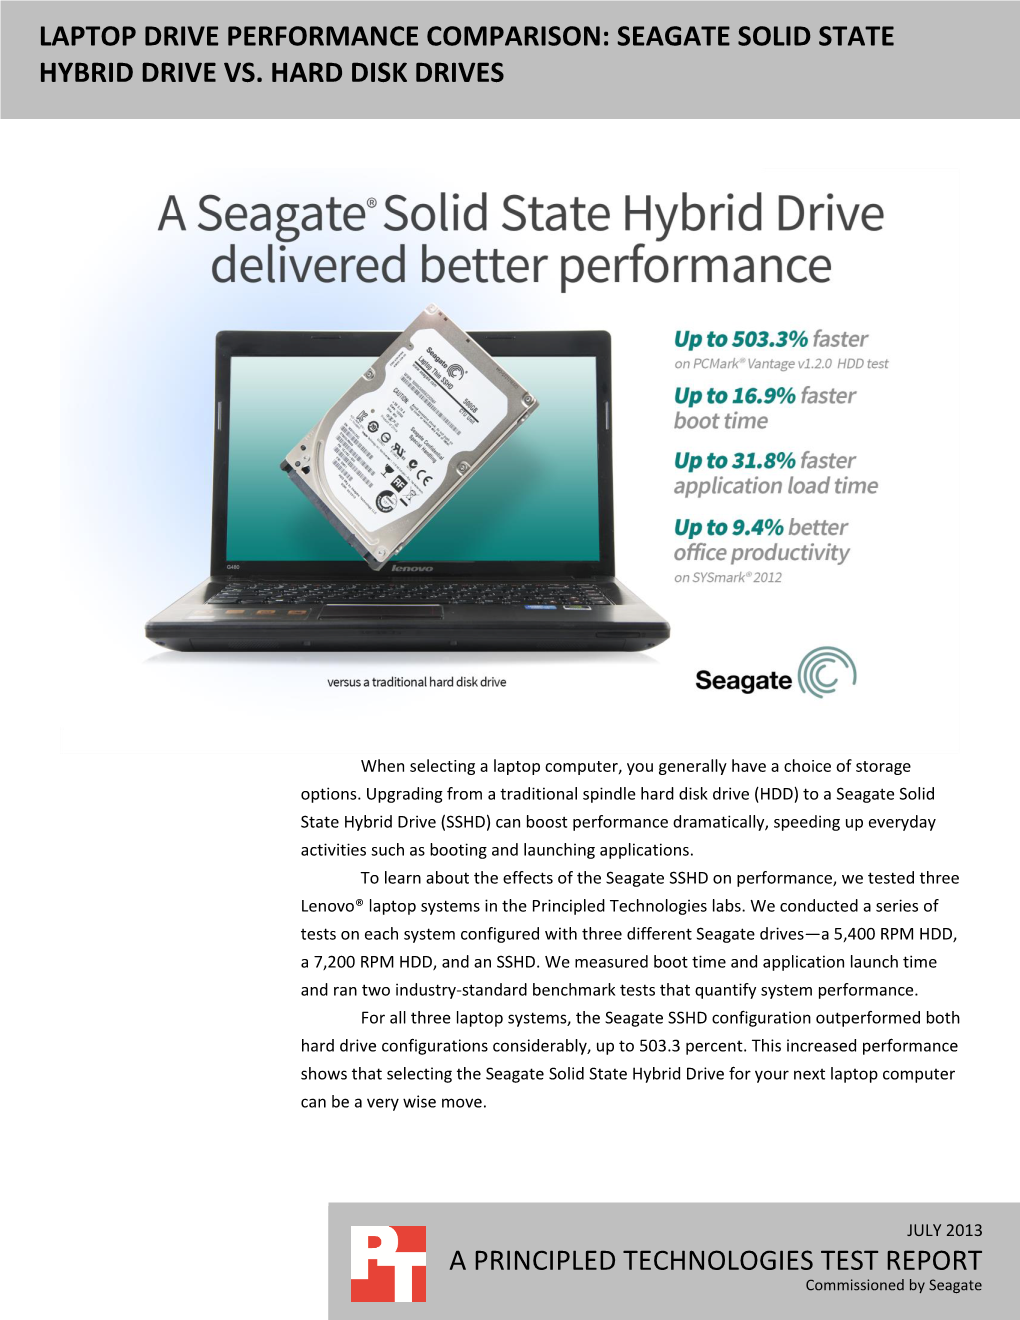 Seagate Solid State Hybrid Drive Vs. Spindle Hard Disk Drives